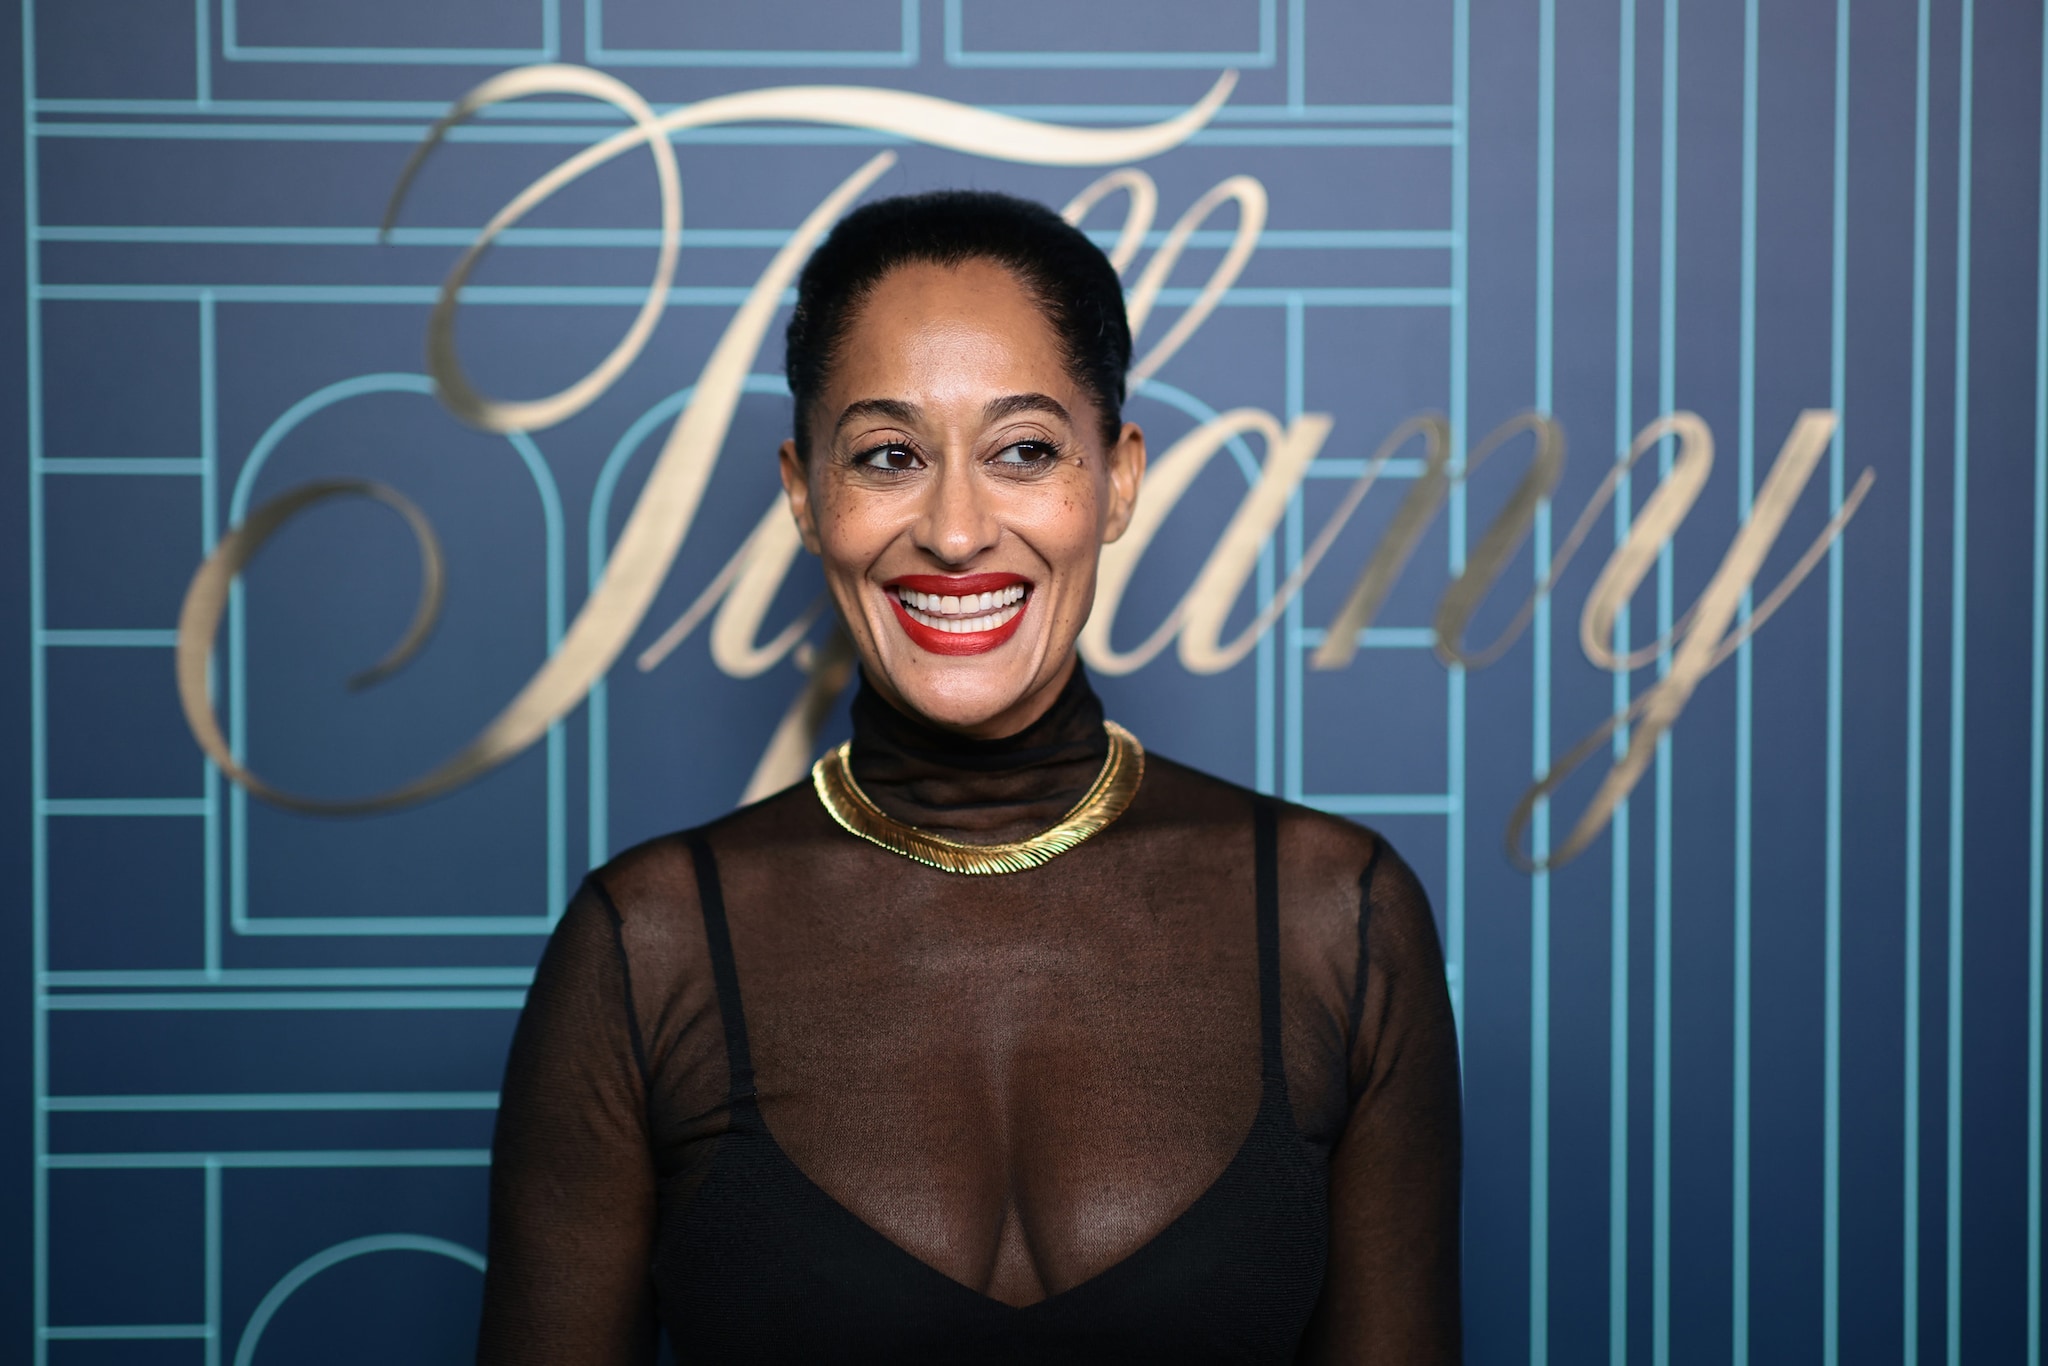  Tracee Ellis Ross (Photo by Dimitrios Kambouris/Getty Images for Tiffany & Co.)